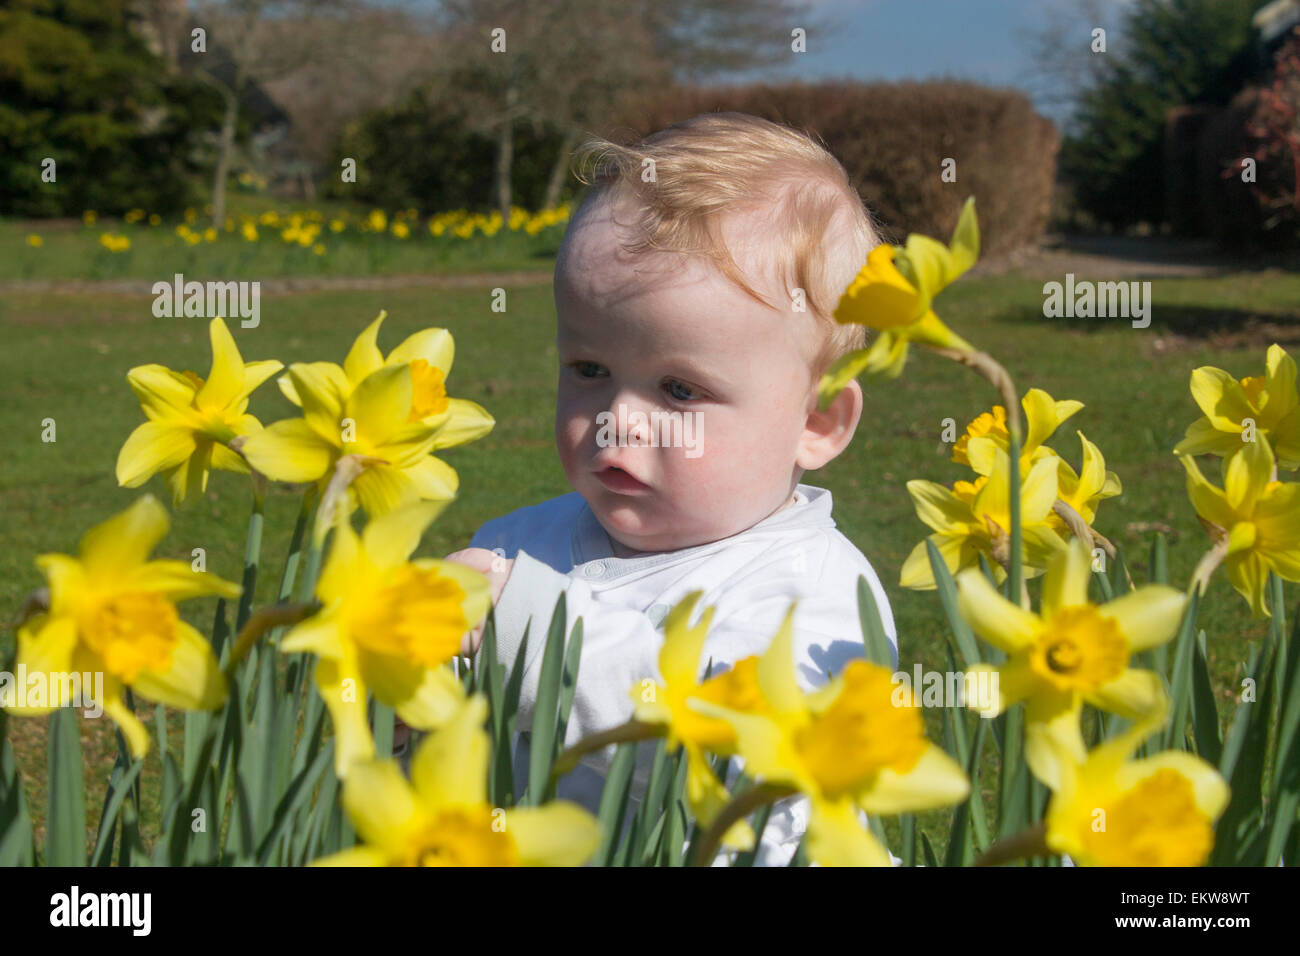 Baby boy aged around 9 months sitting on grass looking at daffodils wearing white suit Wales UK Stock Photo